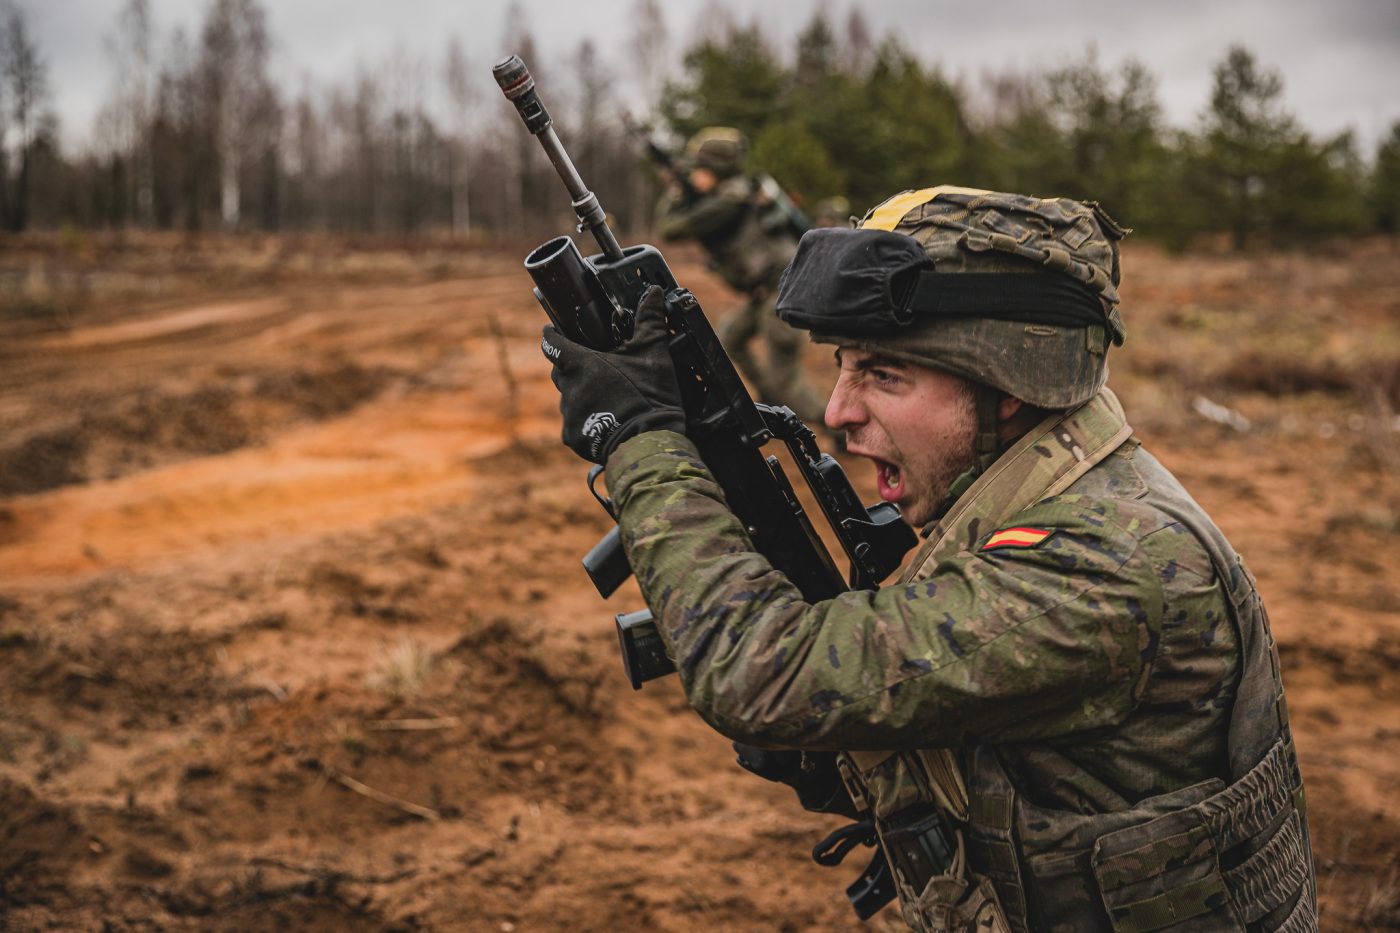 Photo: NATO’s battlegroup in Latvia tested its combat readiness during exercise Crystal Arrow 2023 A soldier from the Spanish Army yelling and running across the field during exercise Crystal Arrow 2023 in Latvia. Credit: NATO